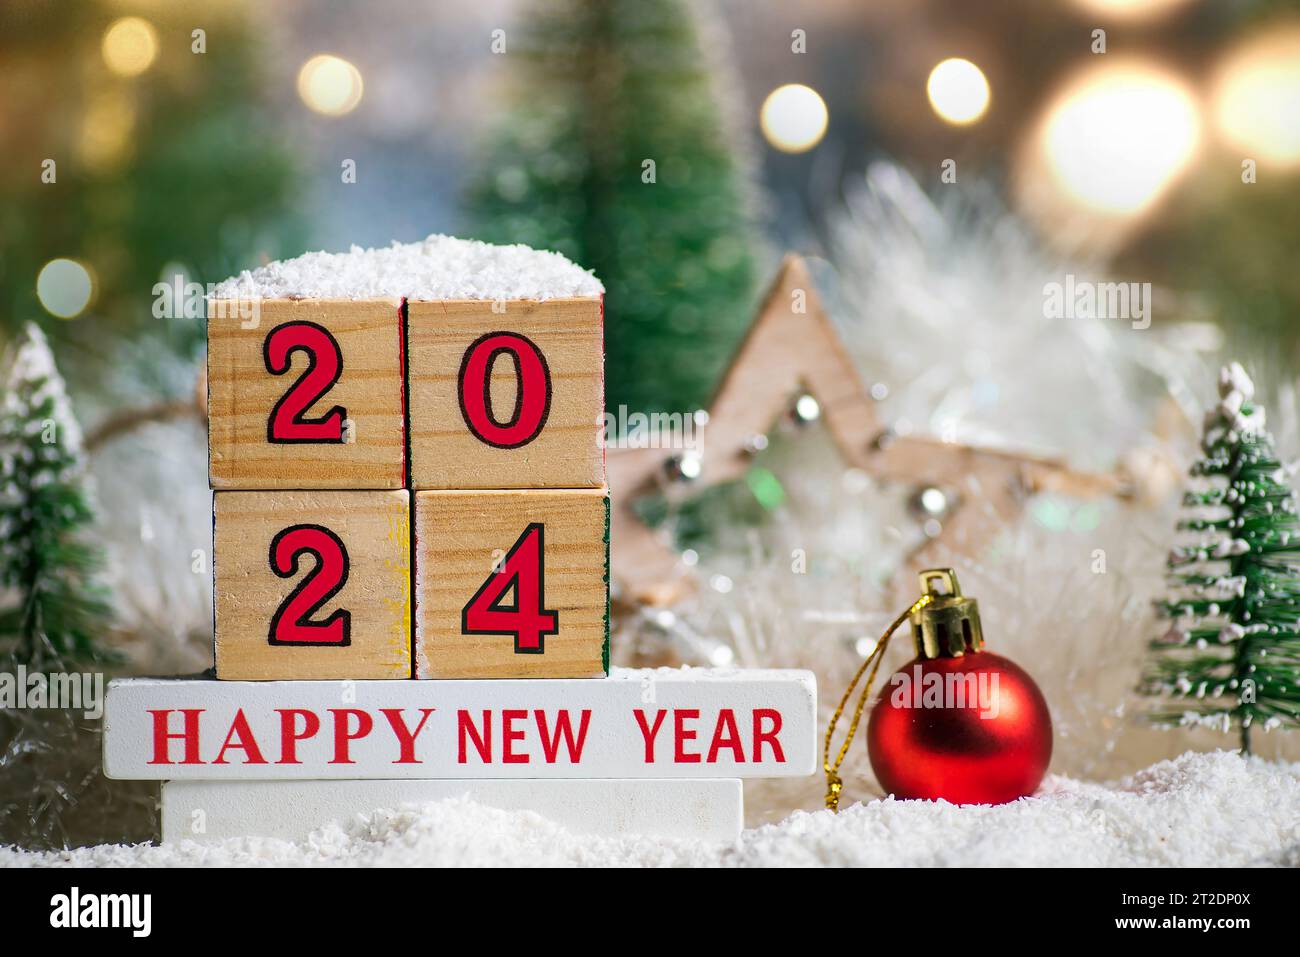 Happy New Year 2024 with Christmas tree winter holiday festive background and ornaments Stock Photo